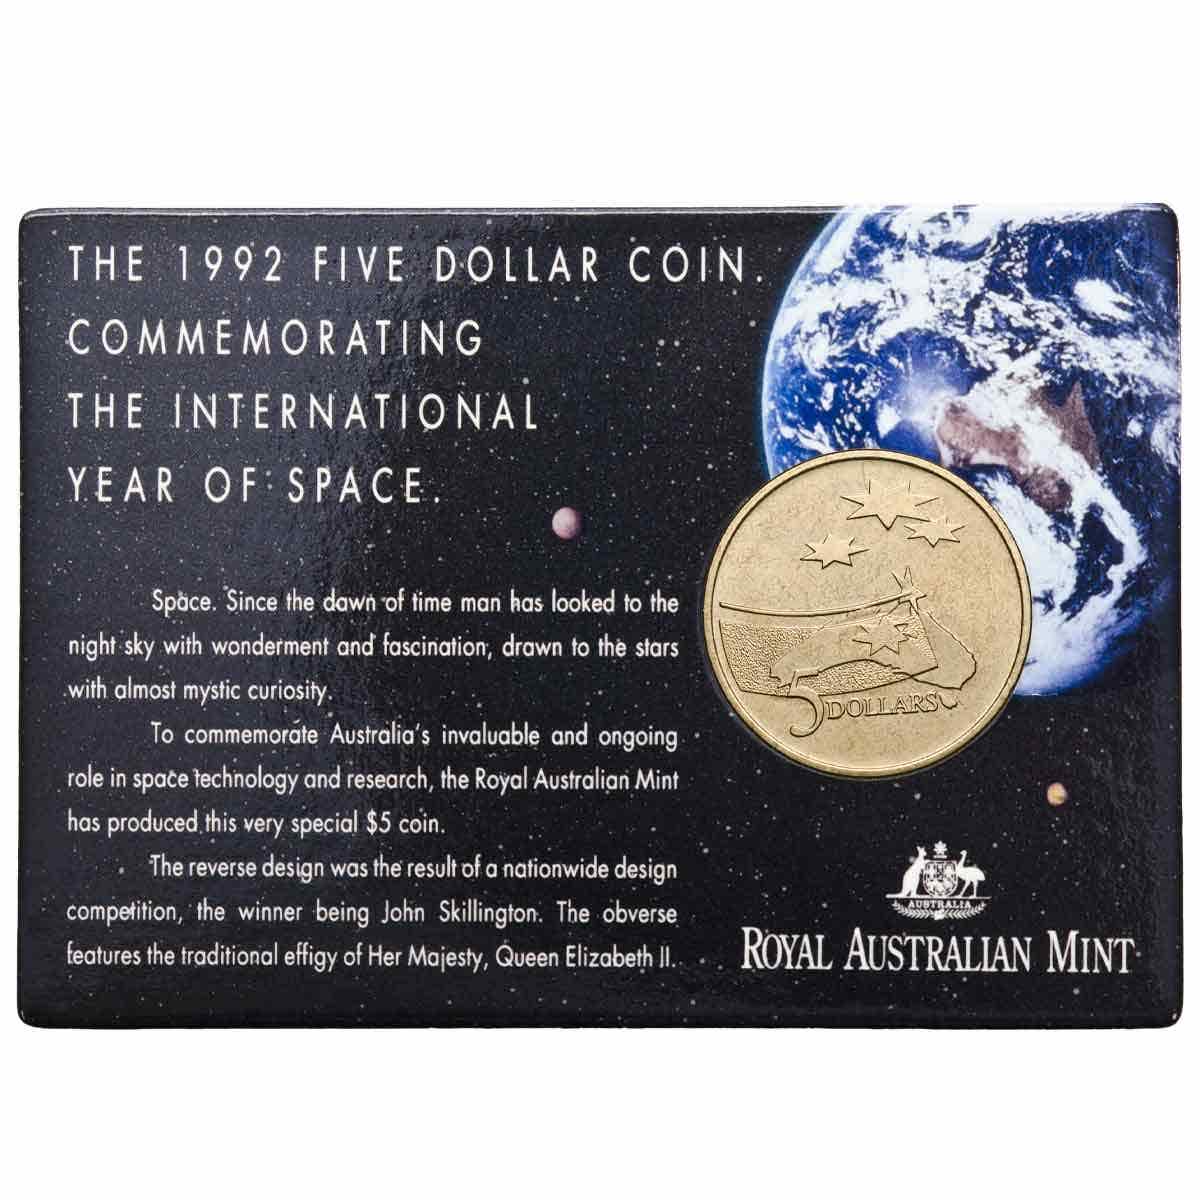 International Year of Space 1992 $5 Al-Br Uncirculated Coin